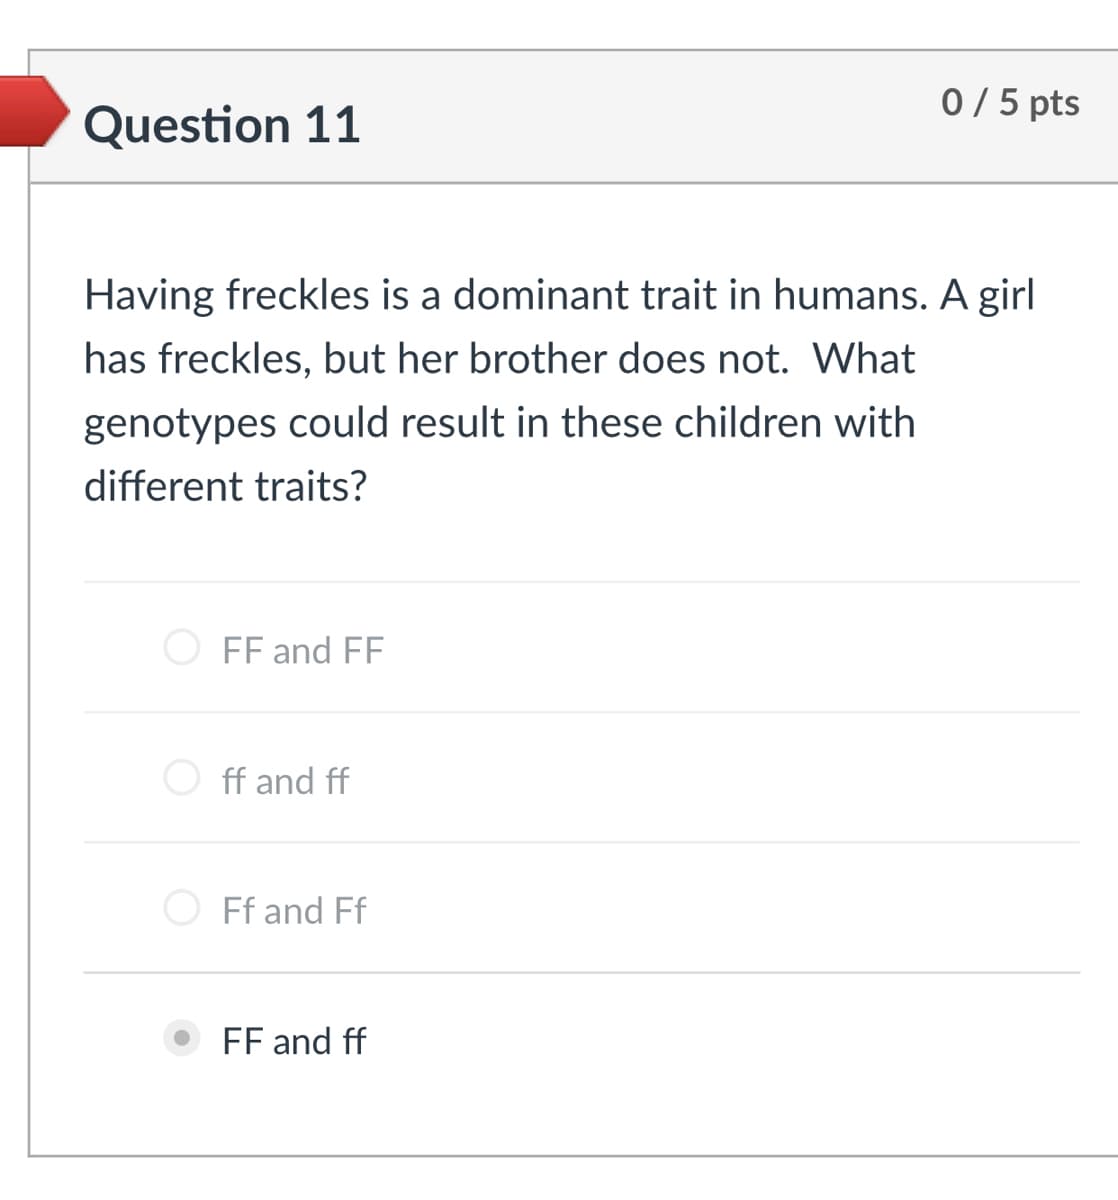 0 / 5 pts
Question 11
Having freckles is a dominant trait in humans. A girl
has freckles, but her brother does not. What
genotypes could result in these children with
different traits?
FF and FF
ff and ff
Ff and Ff
FF and ff
